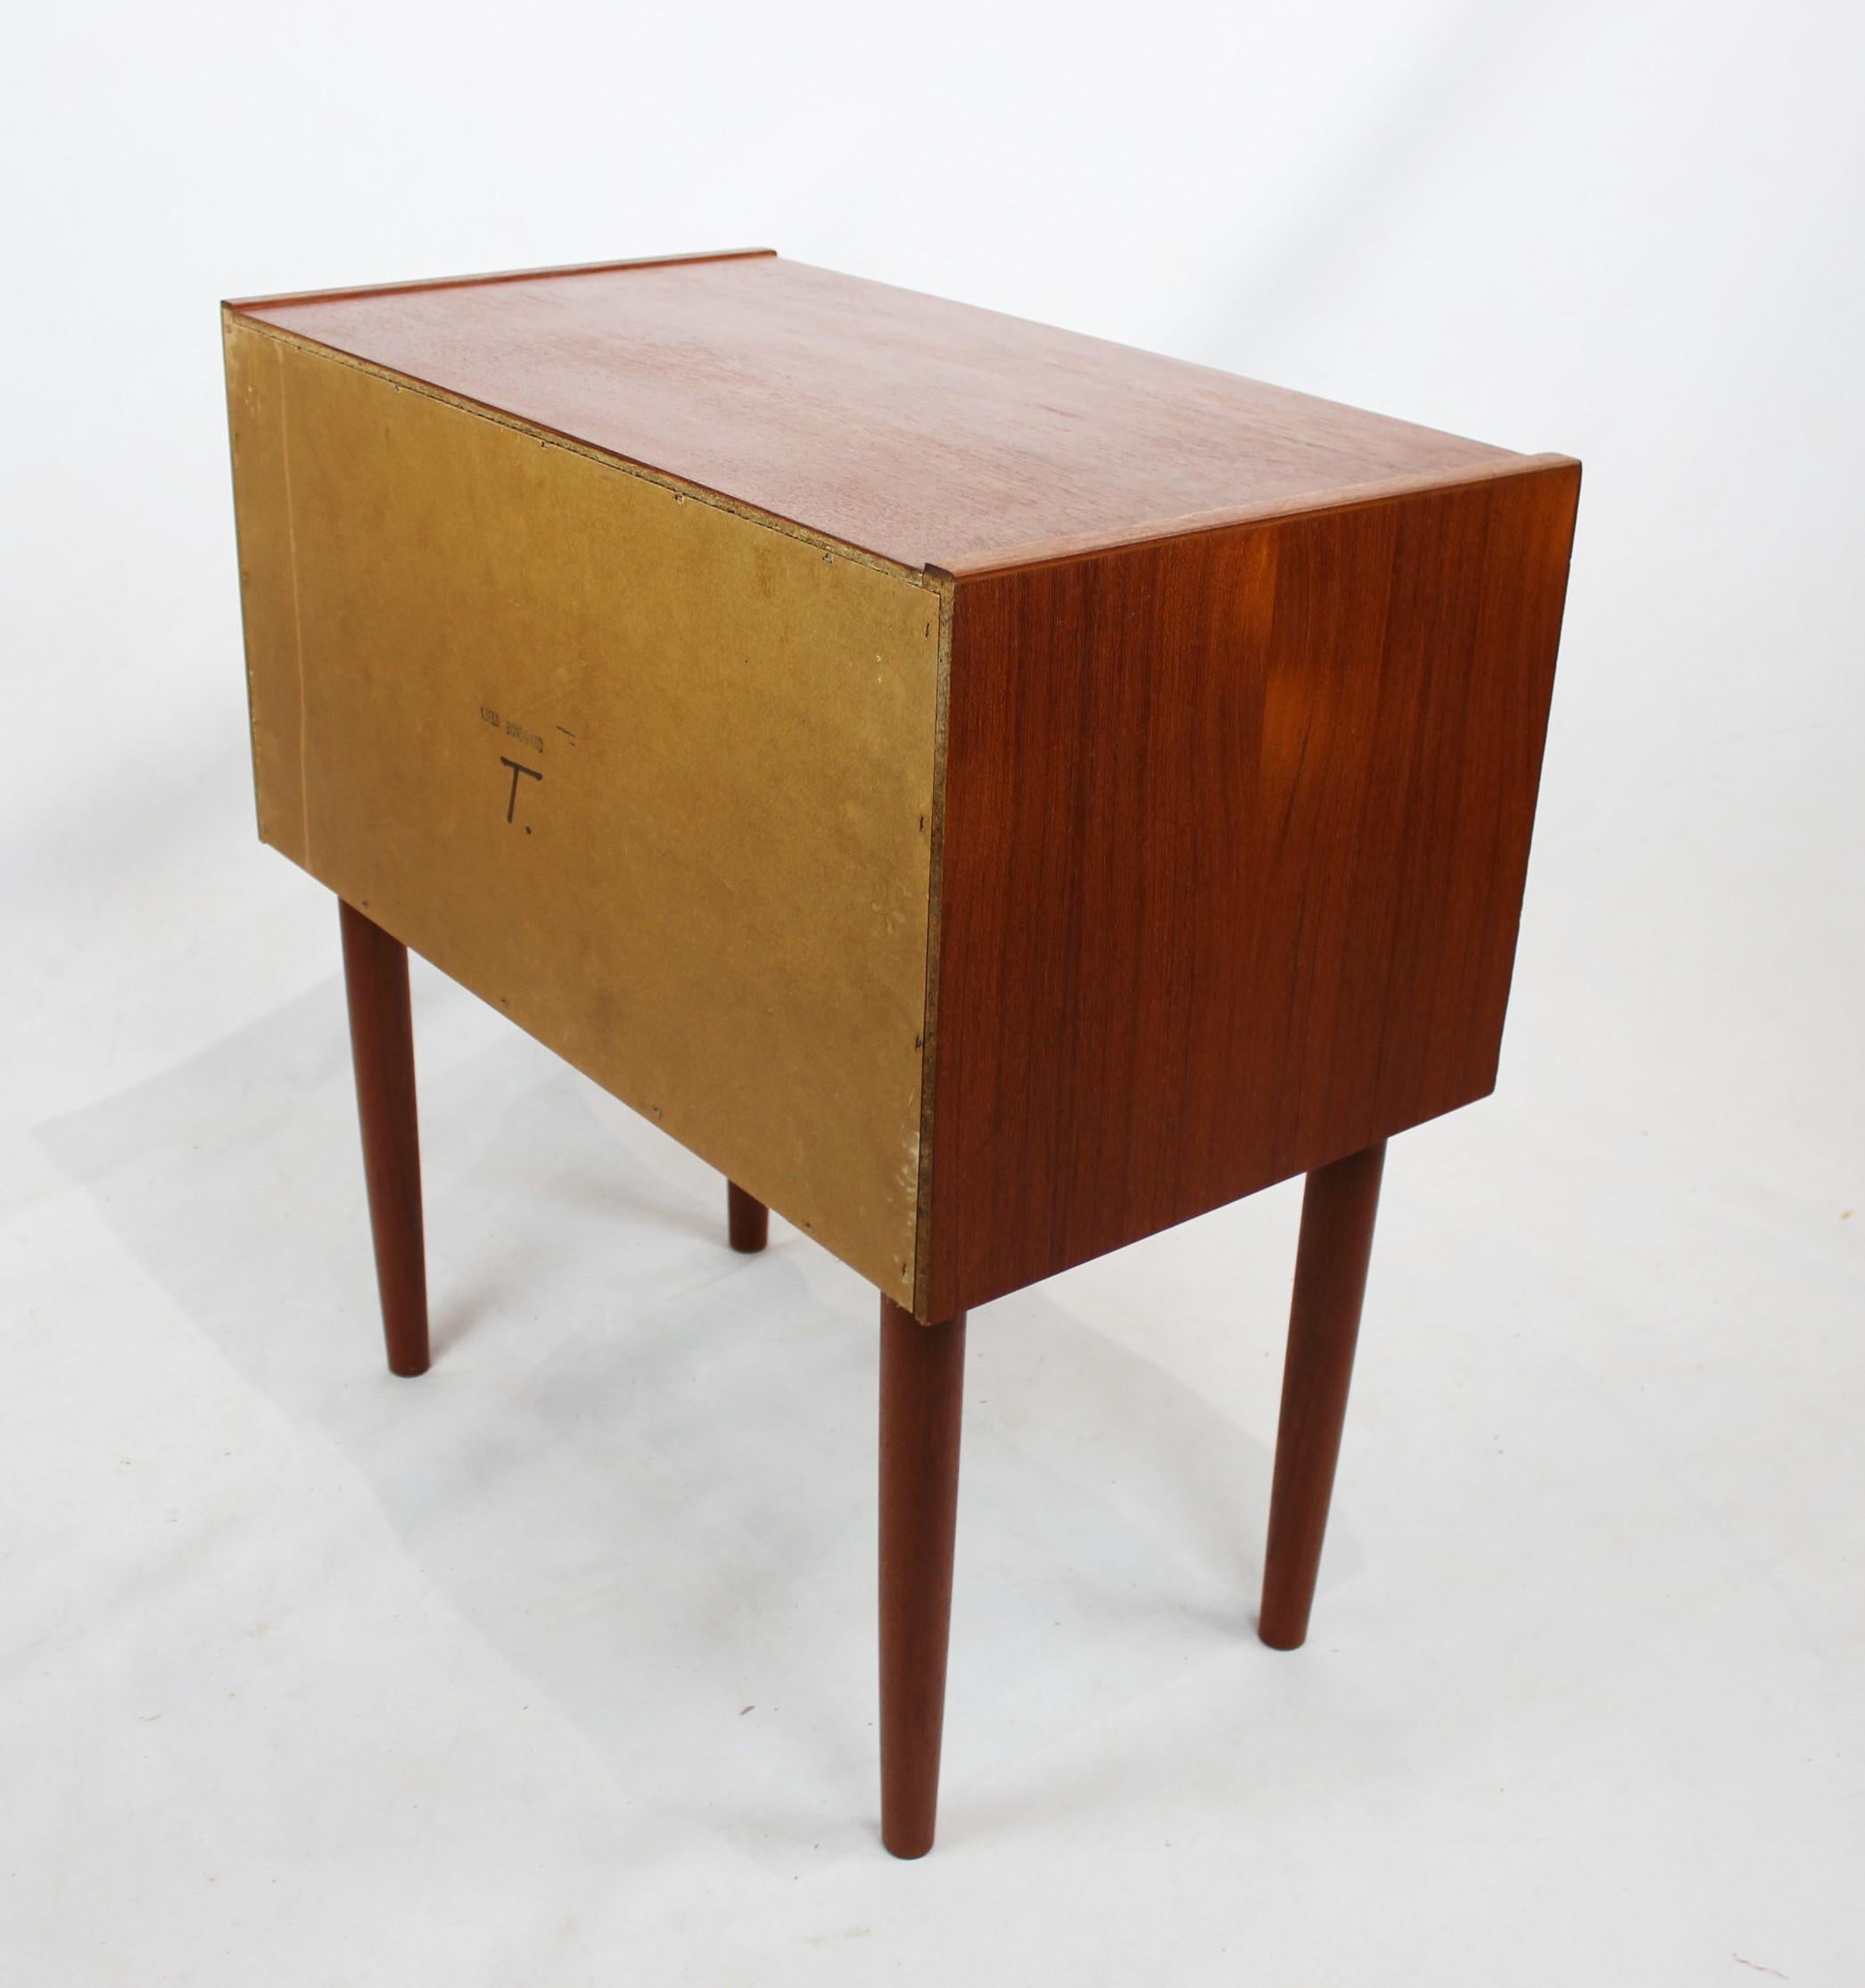 Small Chest of Drawers in Teak of Danish Design from the 1960s For Sale 3